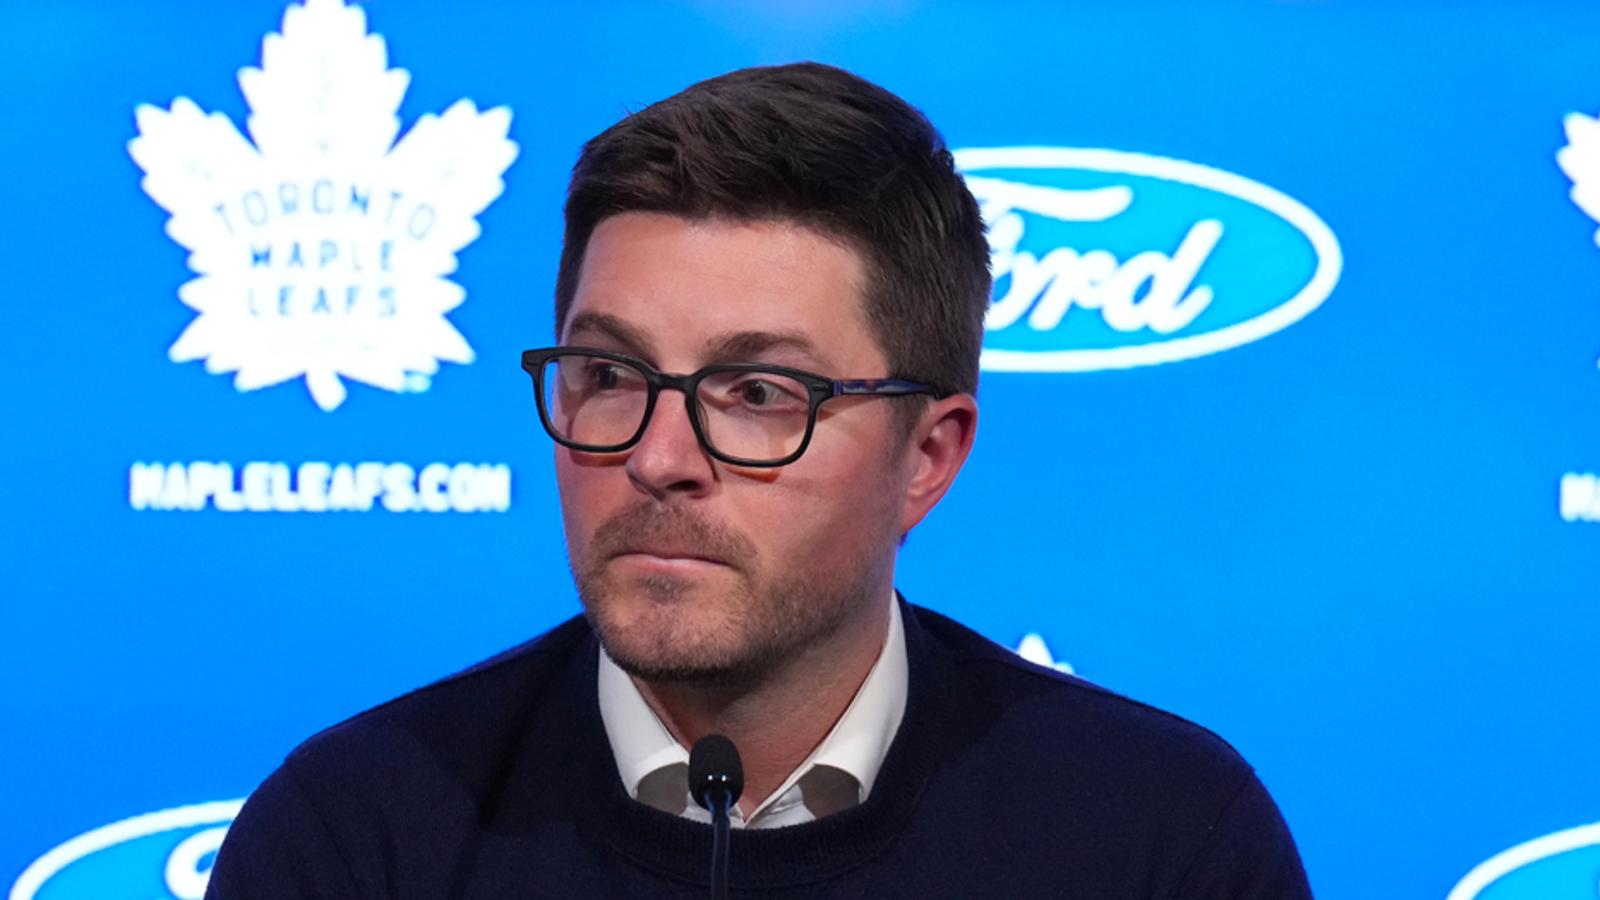 Kyle Dubas under review from NHL concerning his firing in Toronto